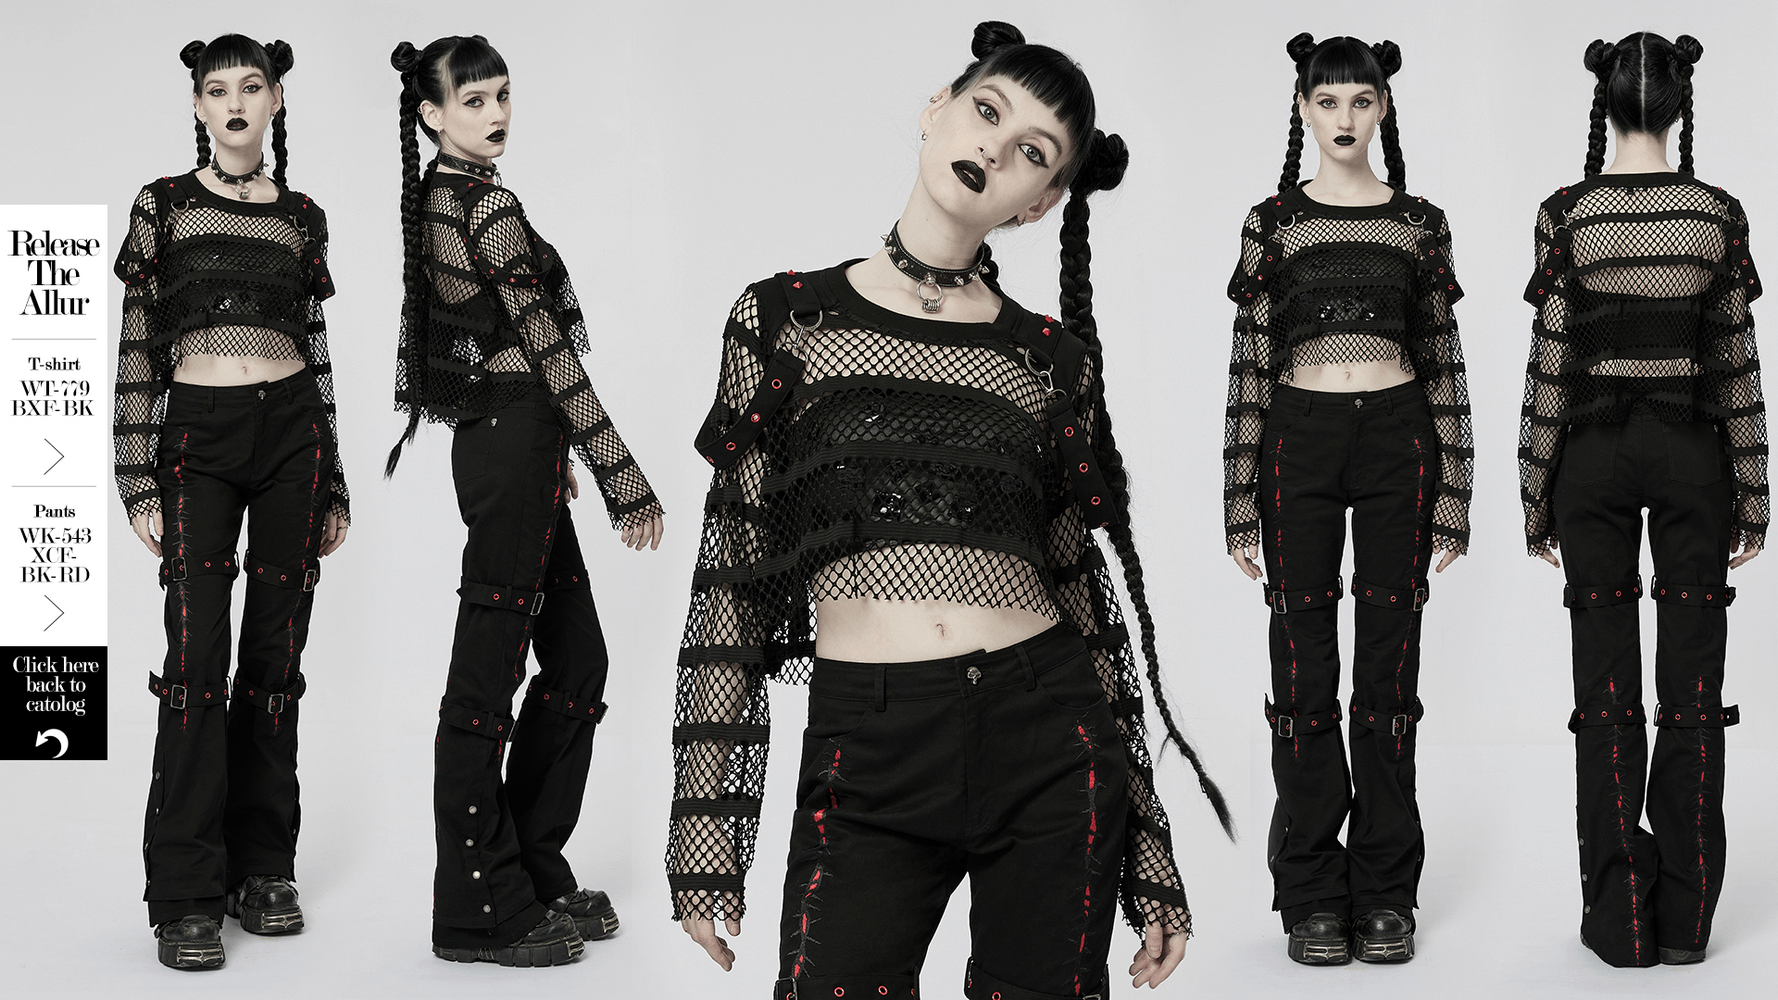 Sexy Sheer Gothic Mesh Top with Rivets - Punk Perspective